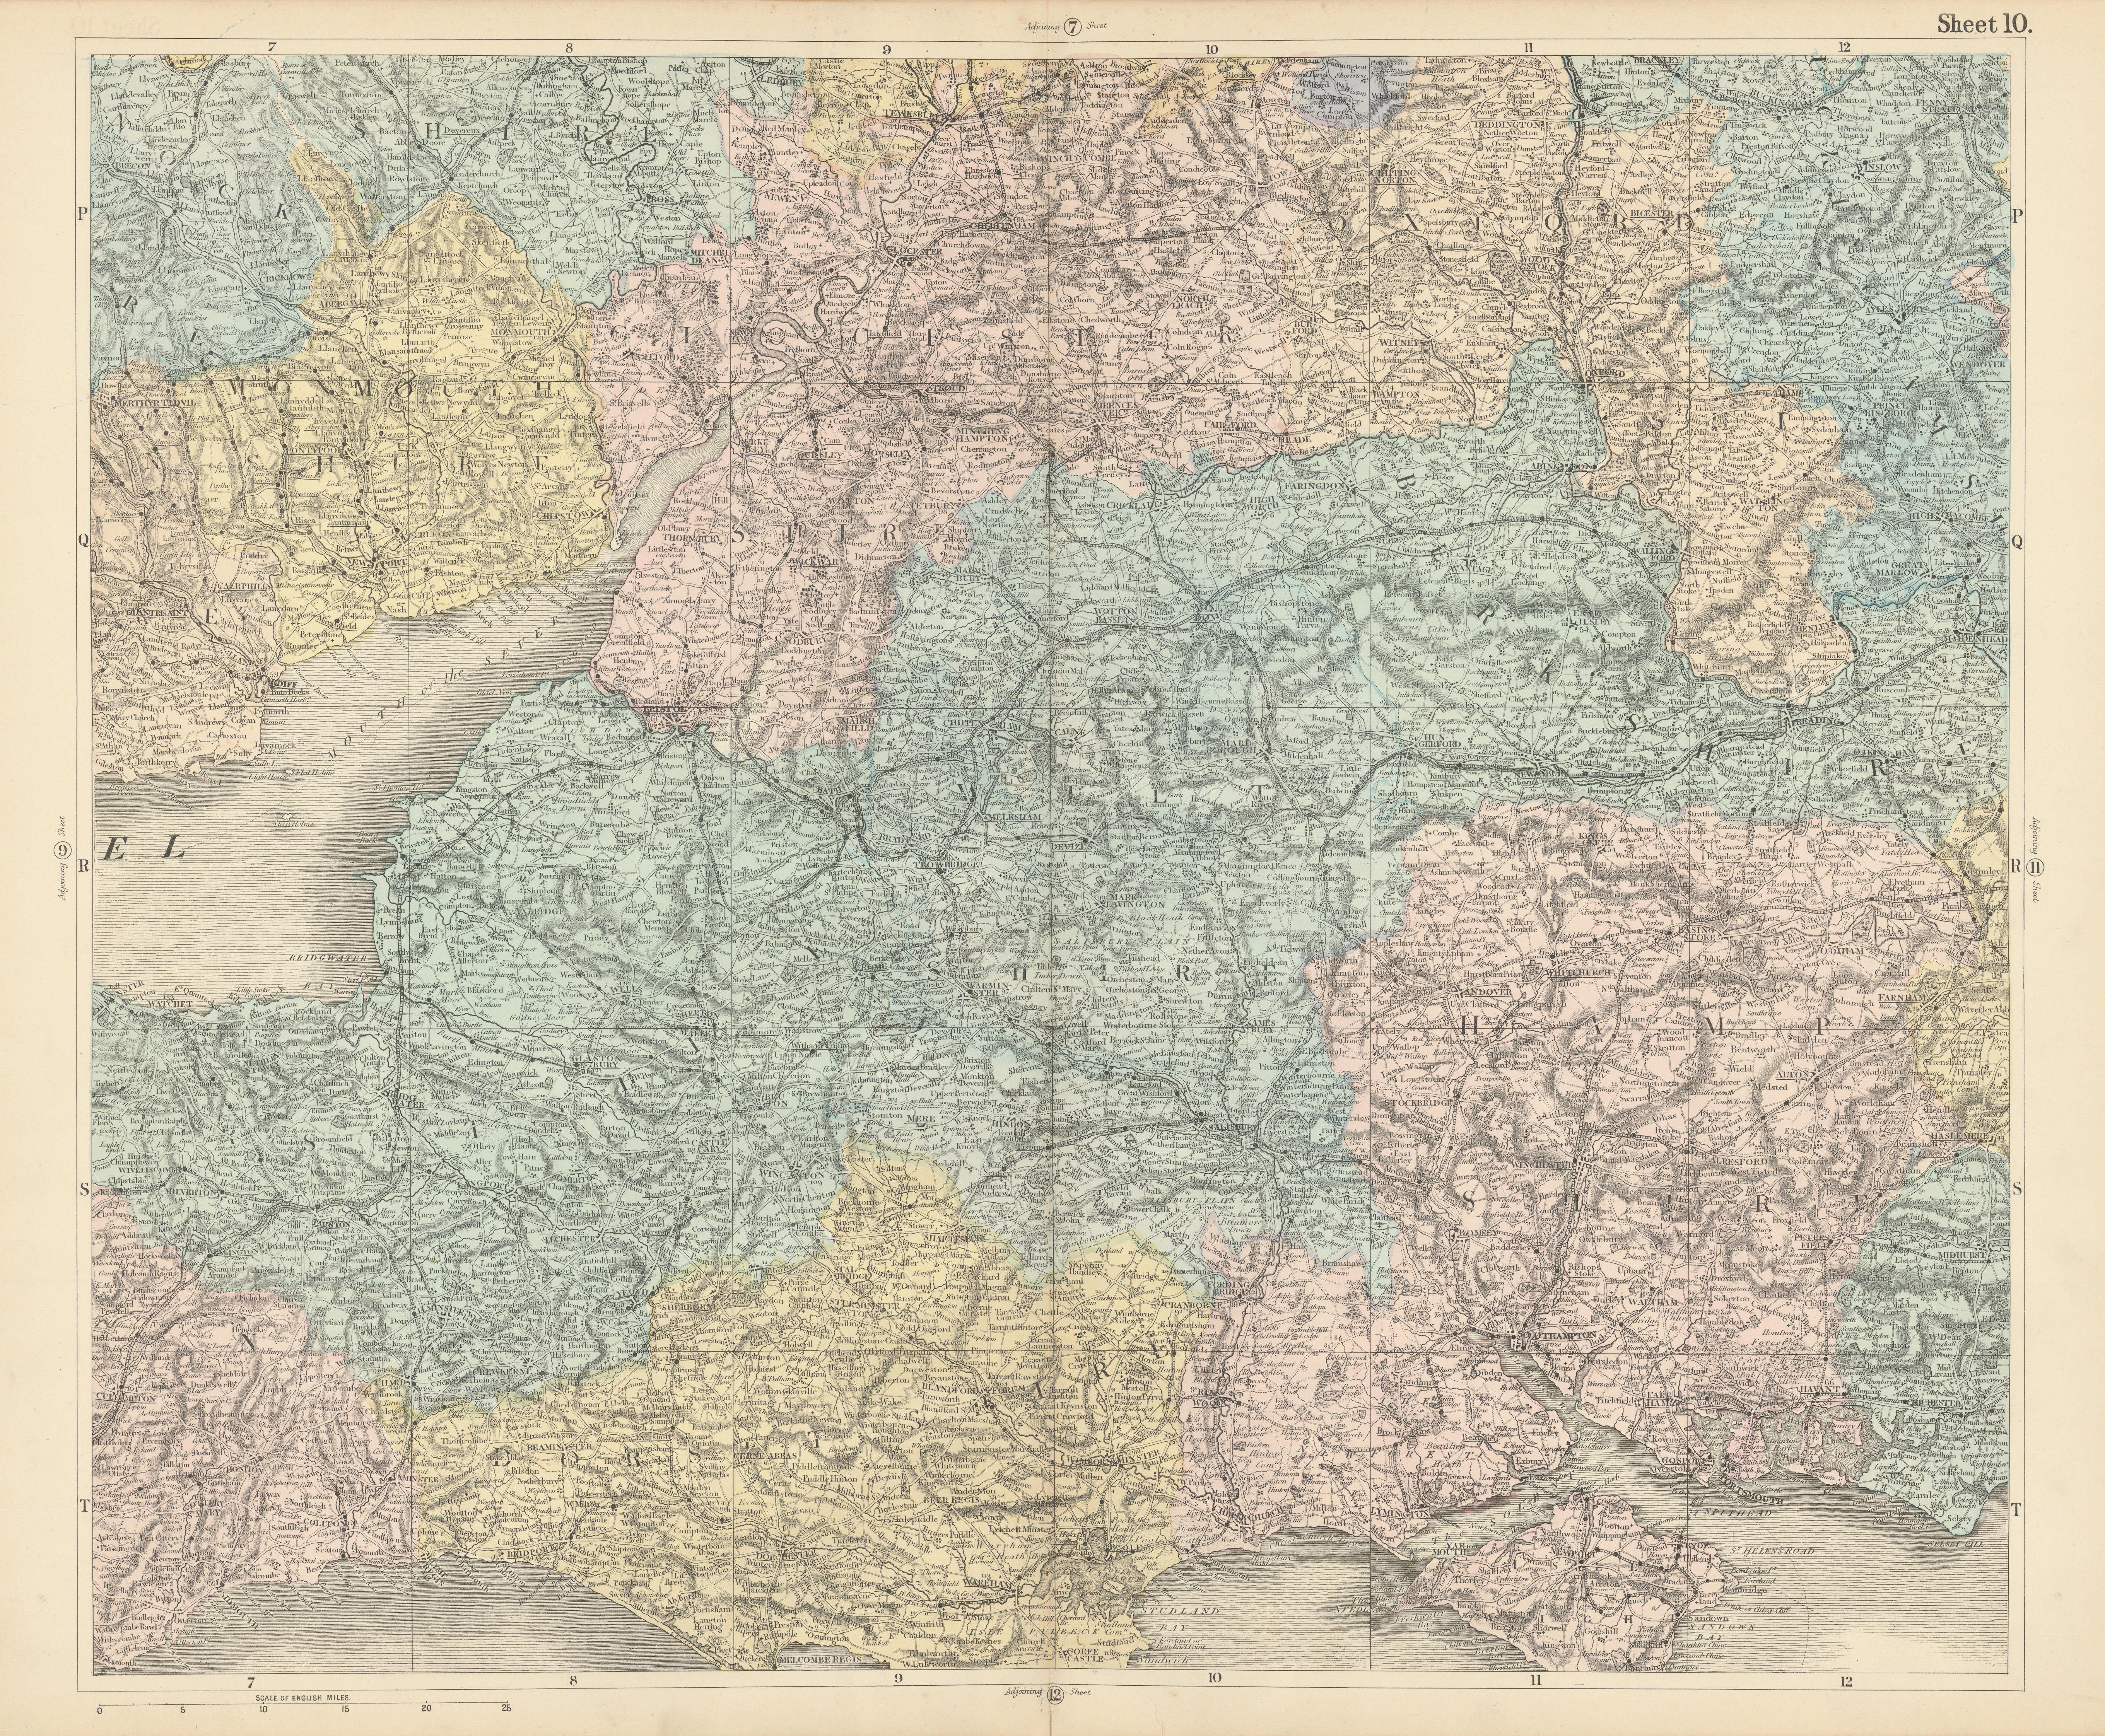 Associate Product South central England. Cotswolds Wessex/South Downs Thames Valley BACON 1883 map